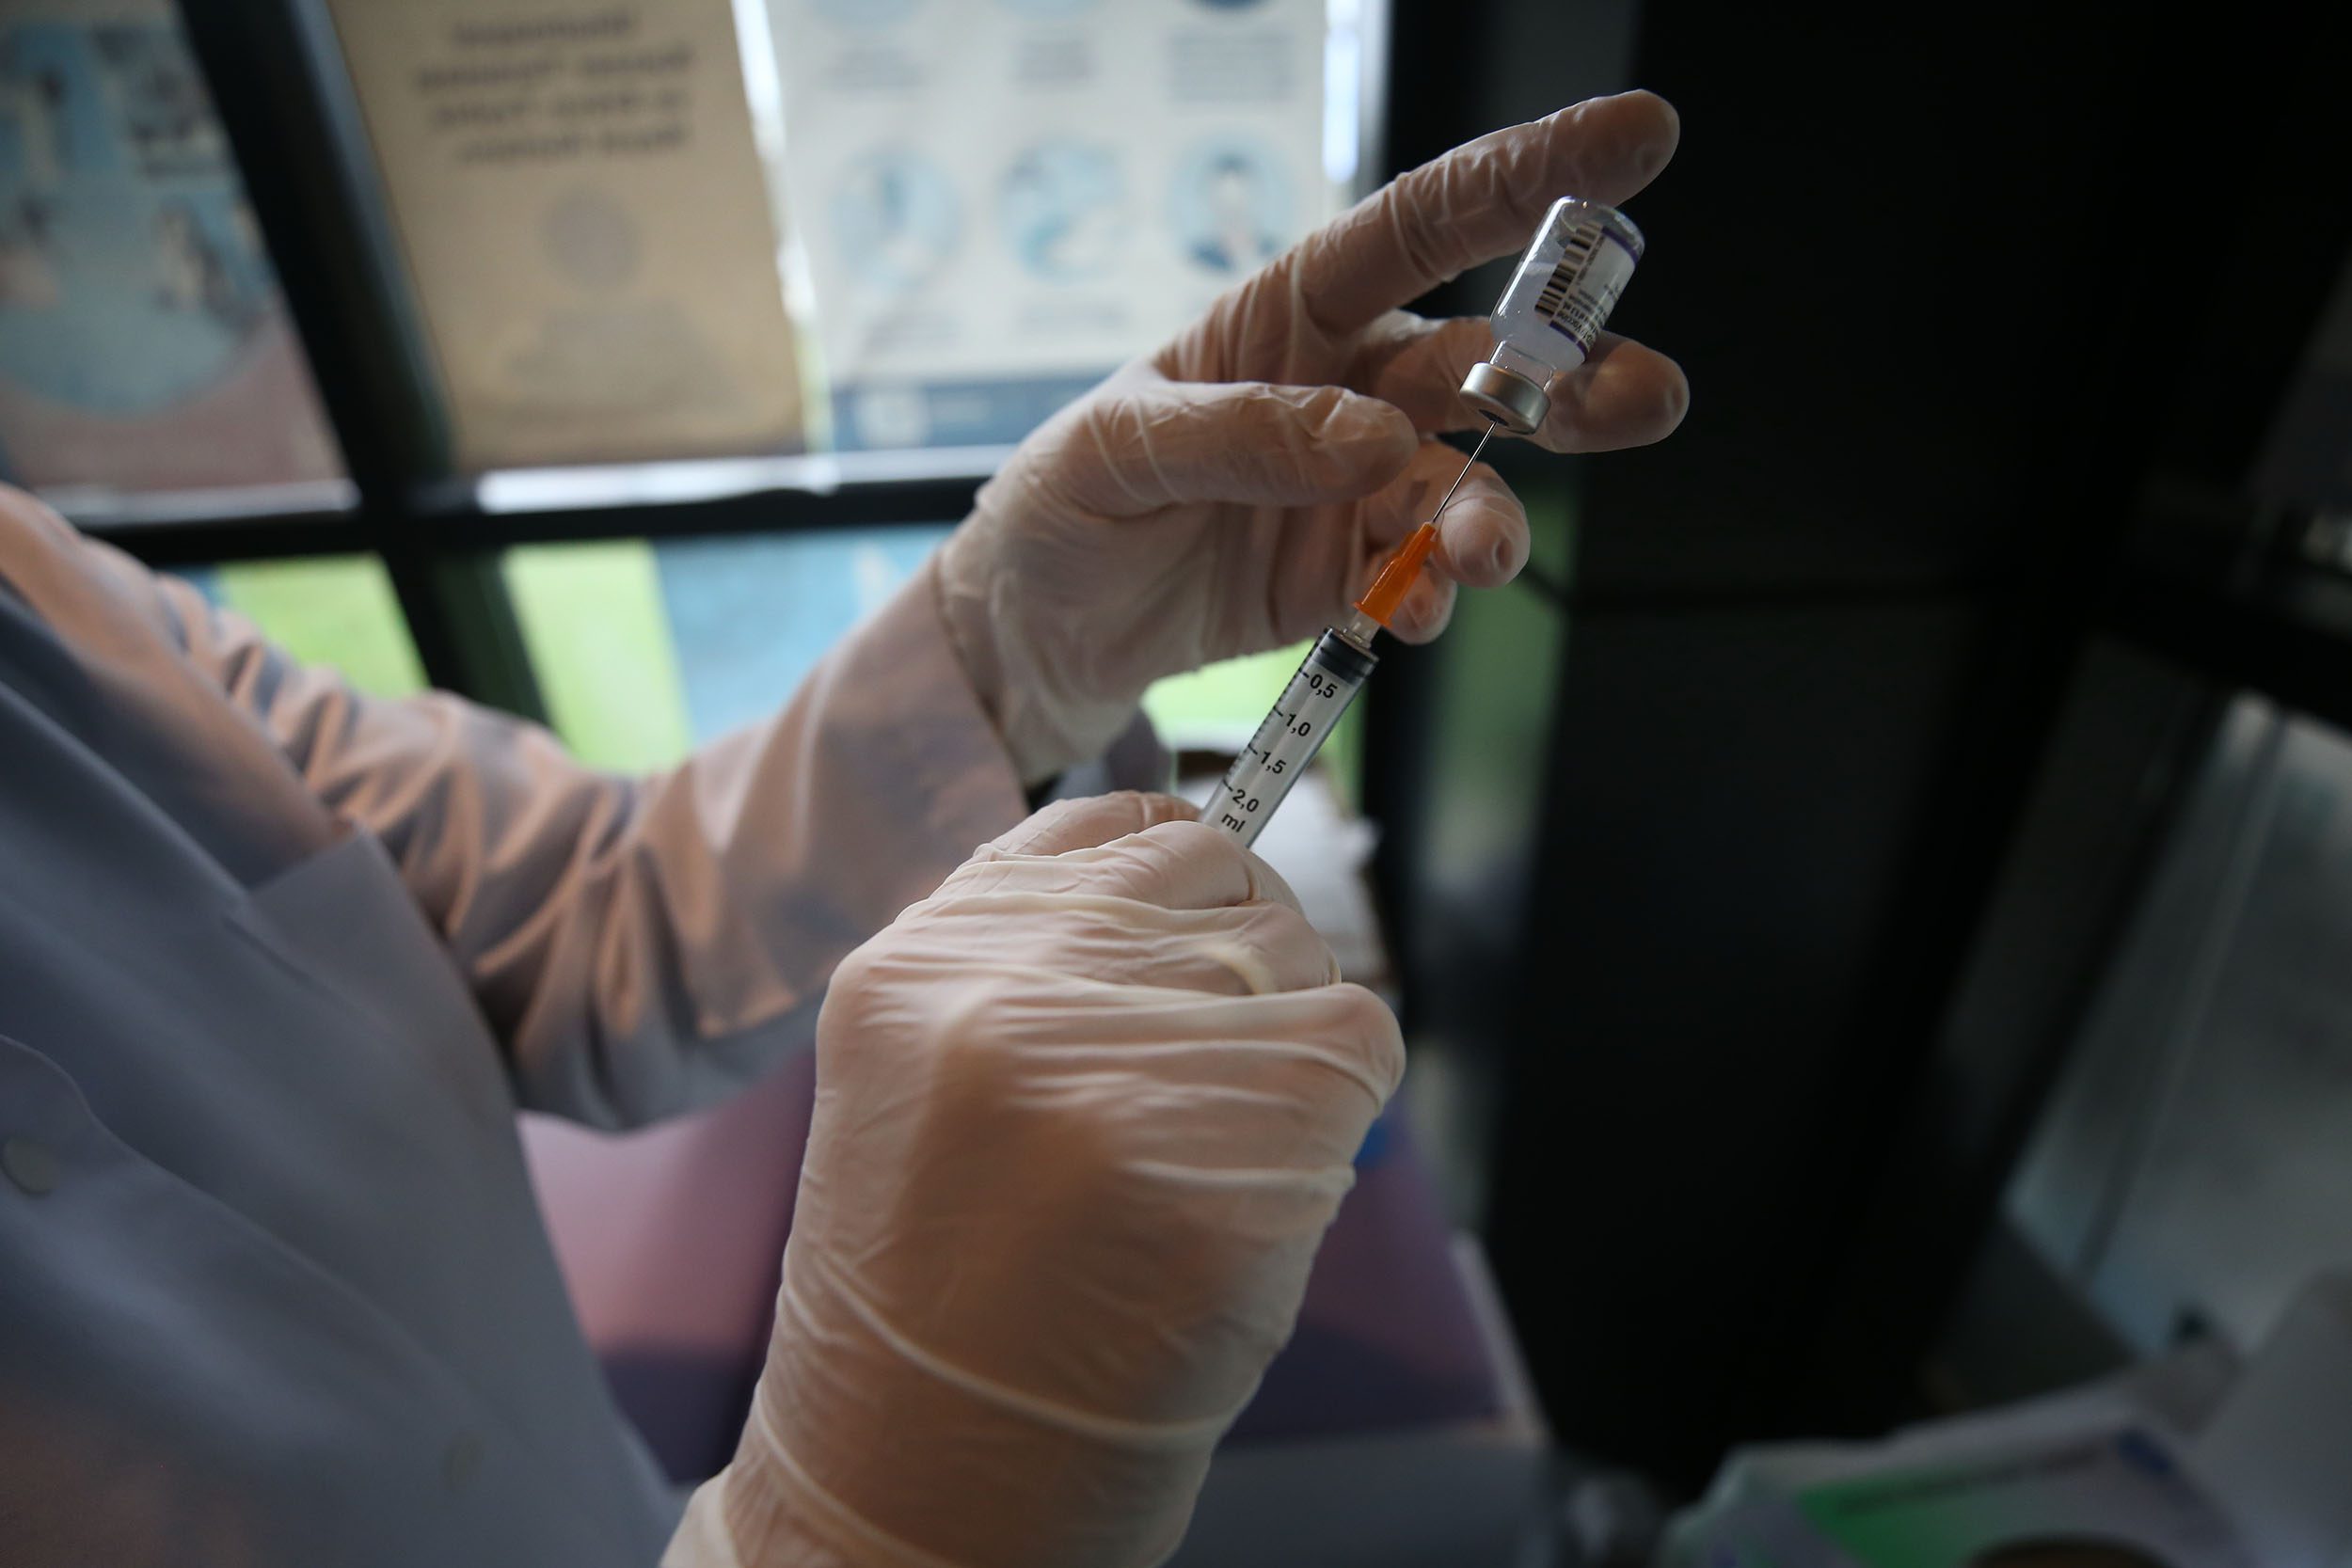 Over 114 million COVID-19 vaccine doses given in Turkey to date